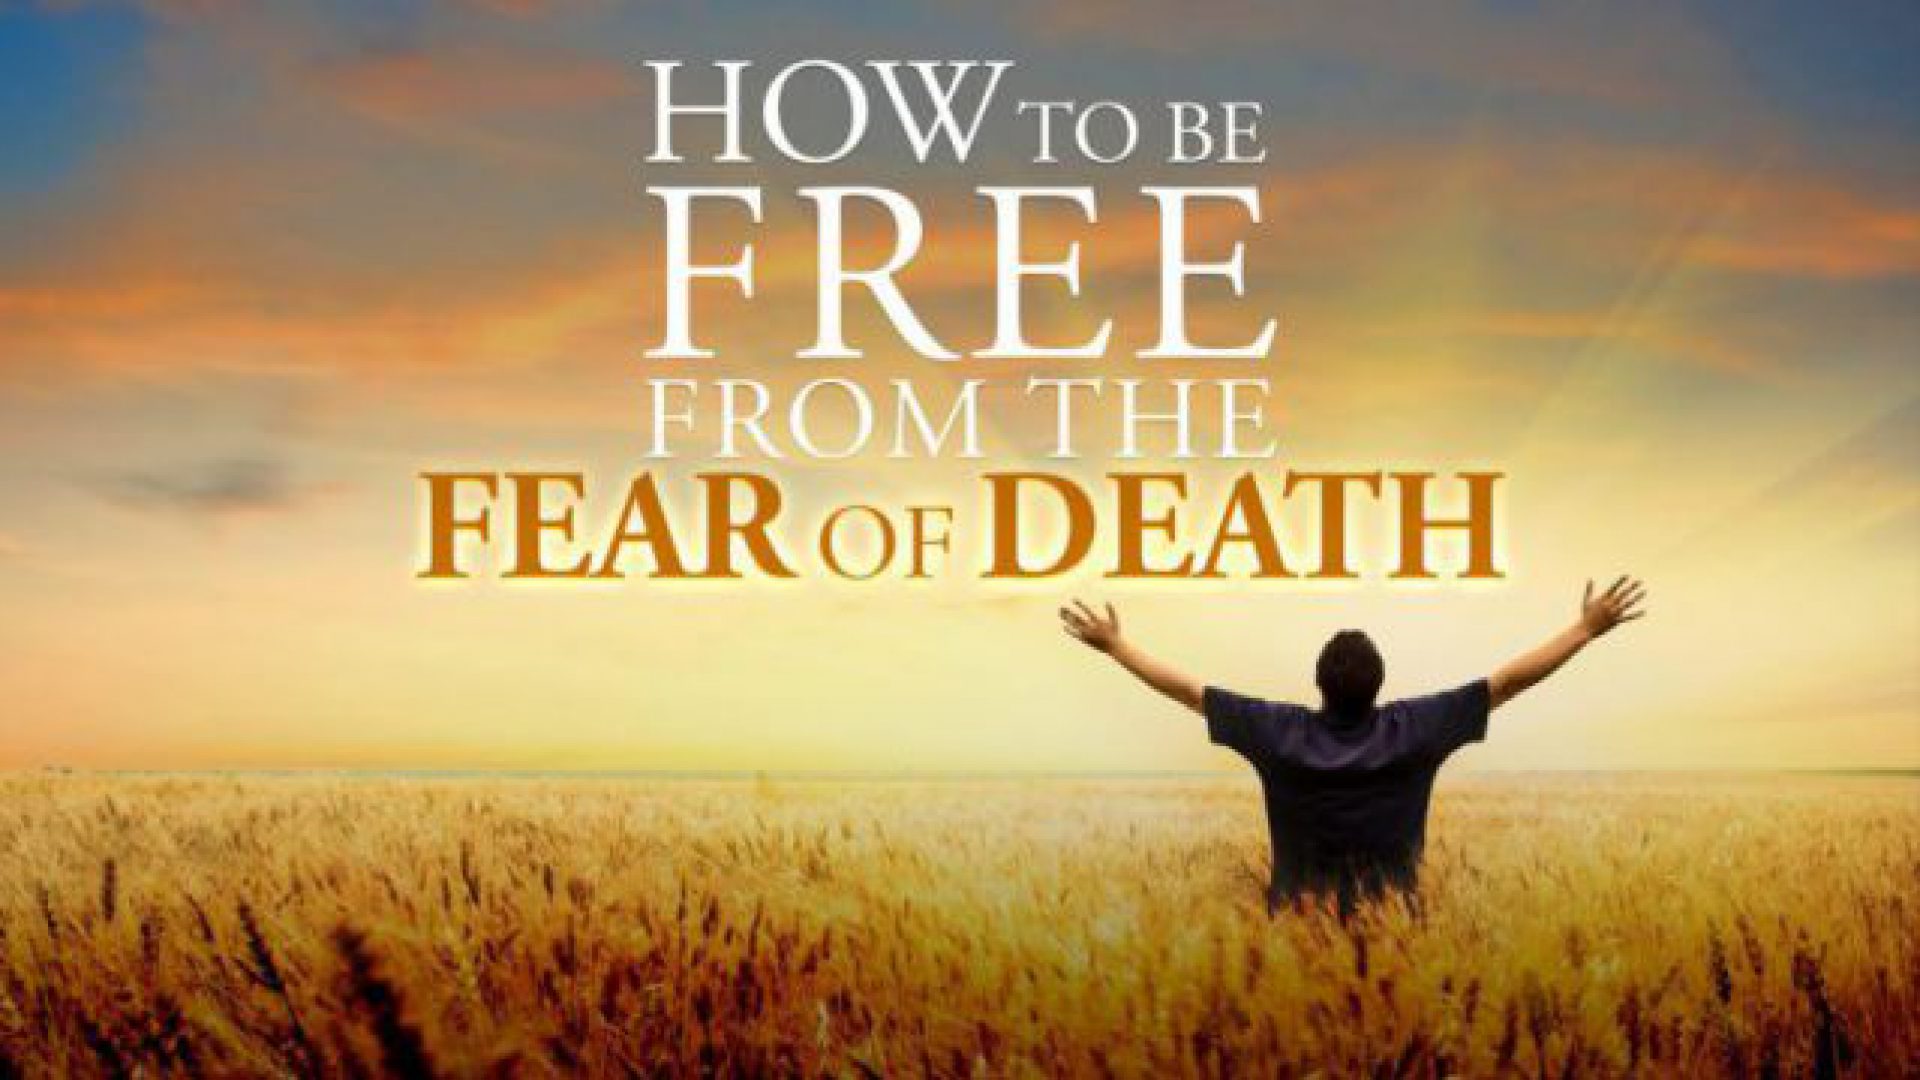 THE FEAR OF DEATH